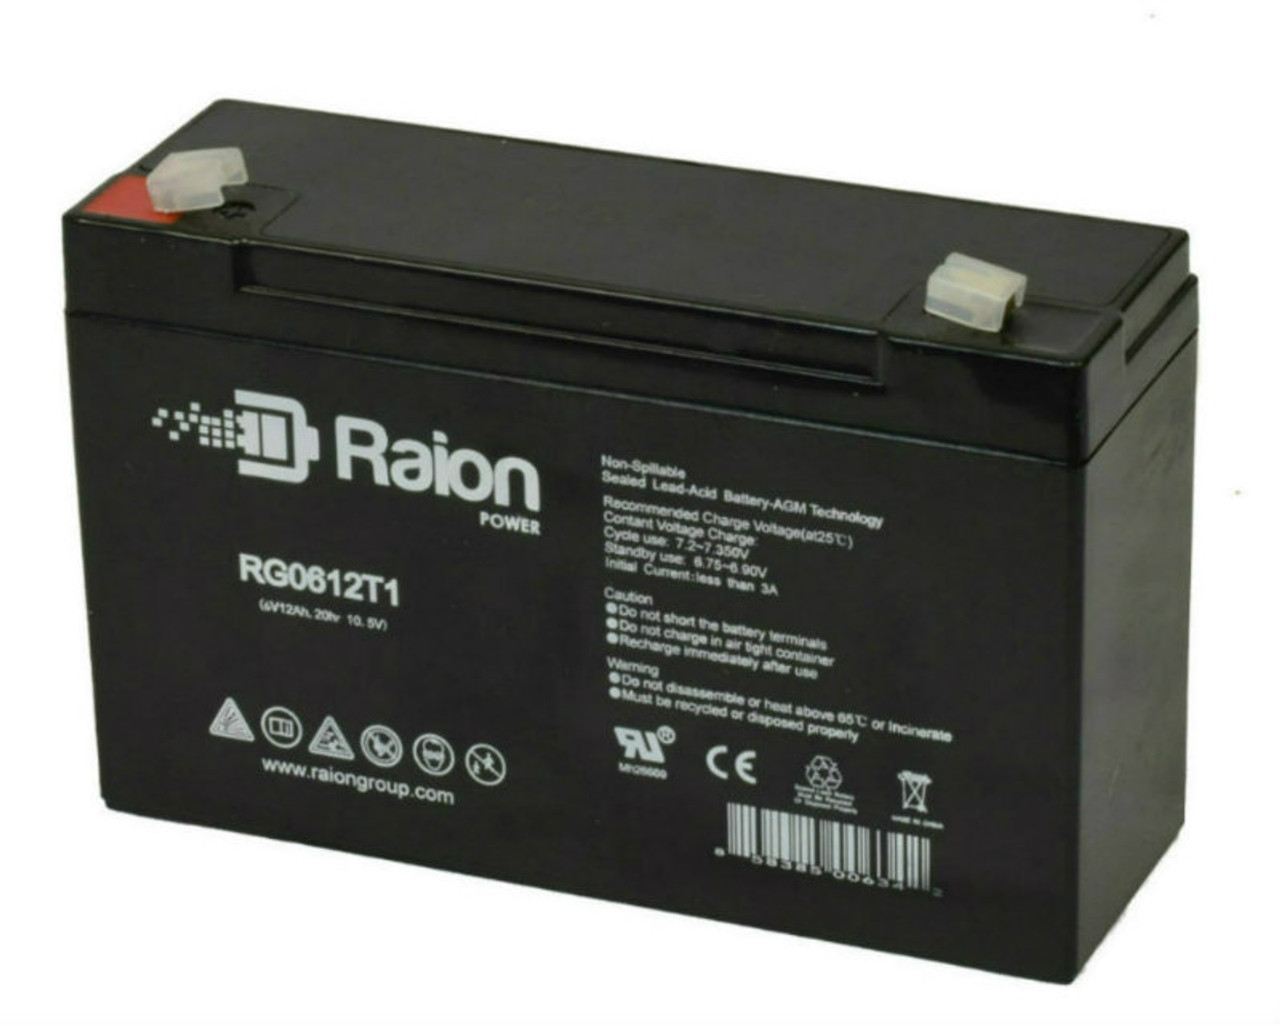 Raion Power RG06120T1 Replacement Battery for Raythunder NP10-6